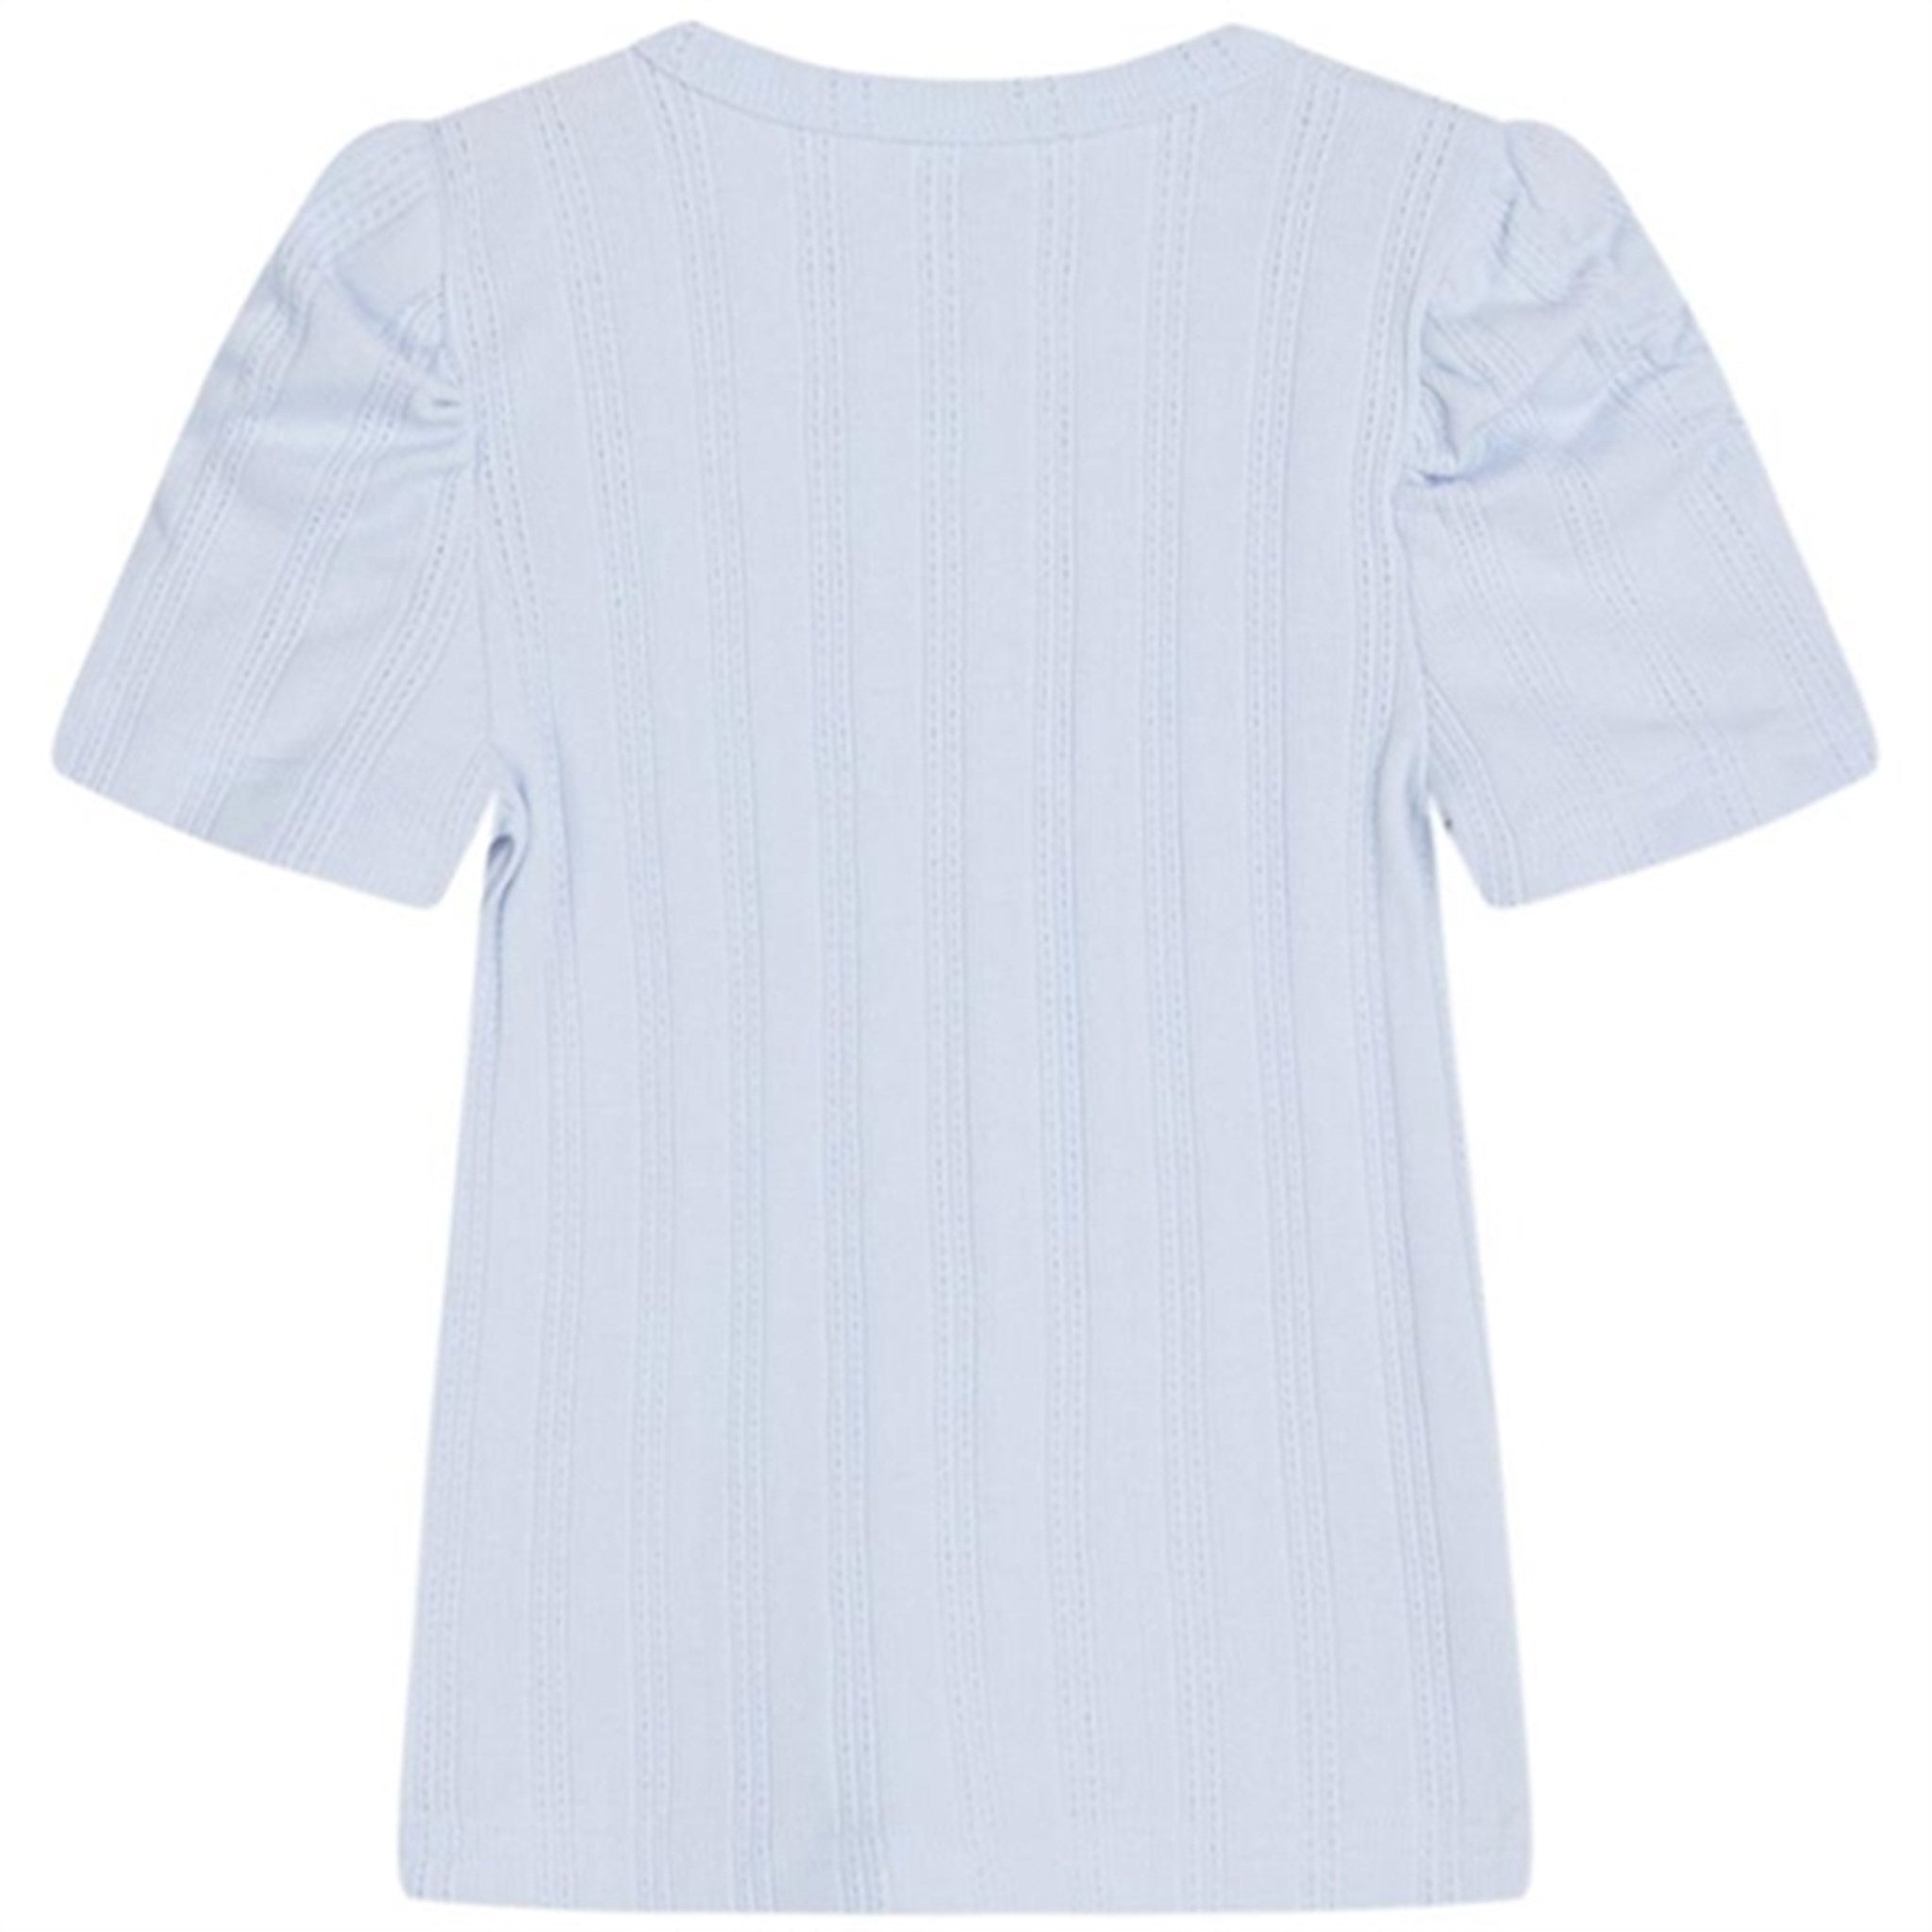 Hust & Claire Mini Abelline T-shirt Water 2